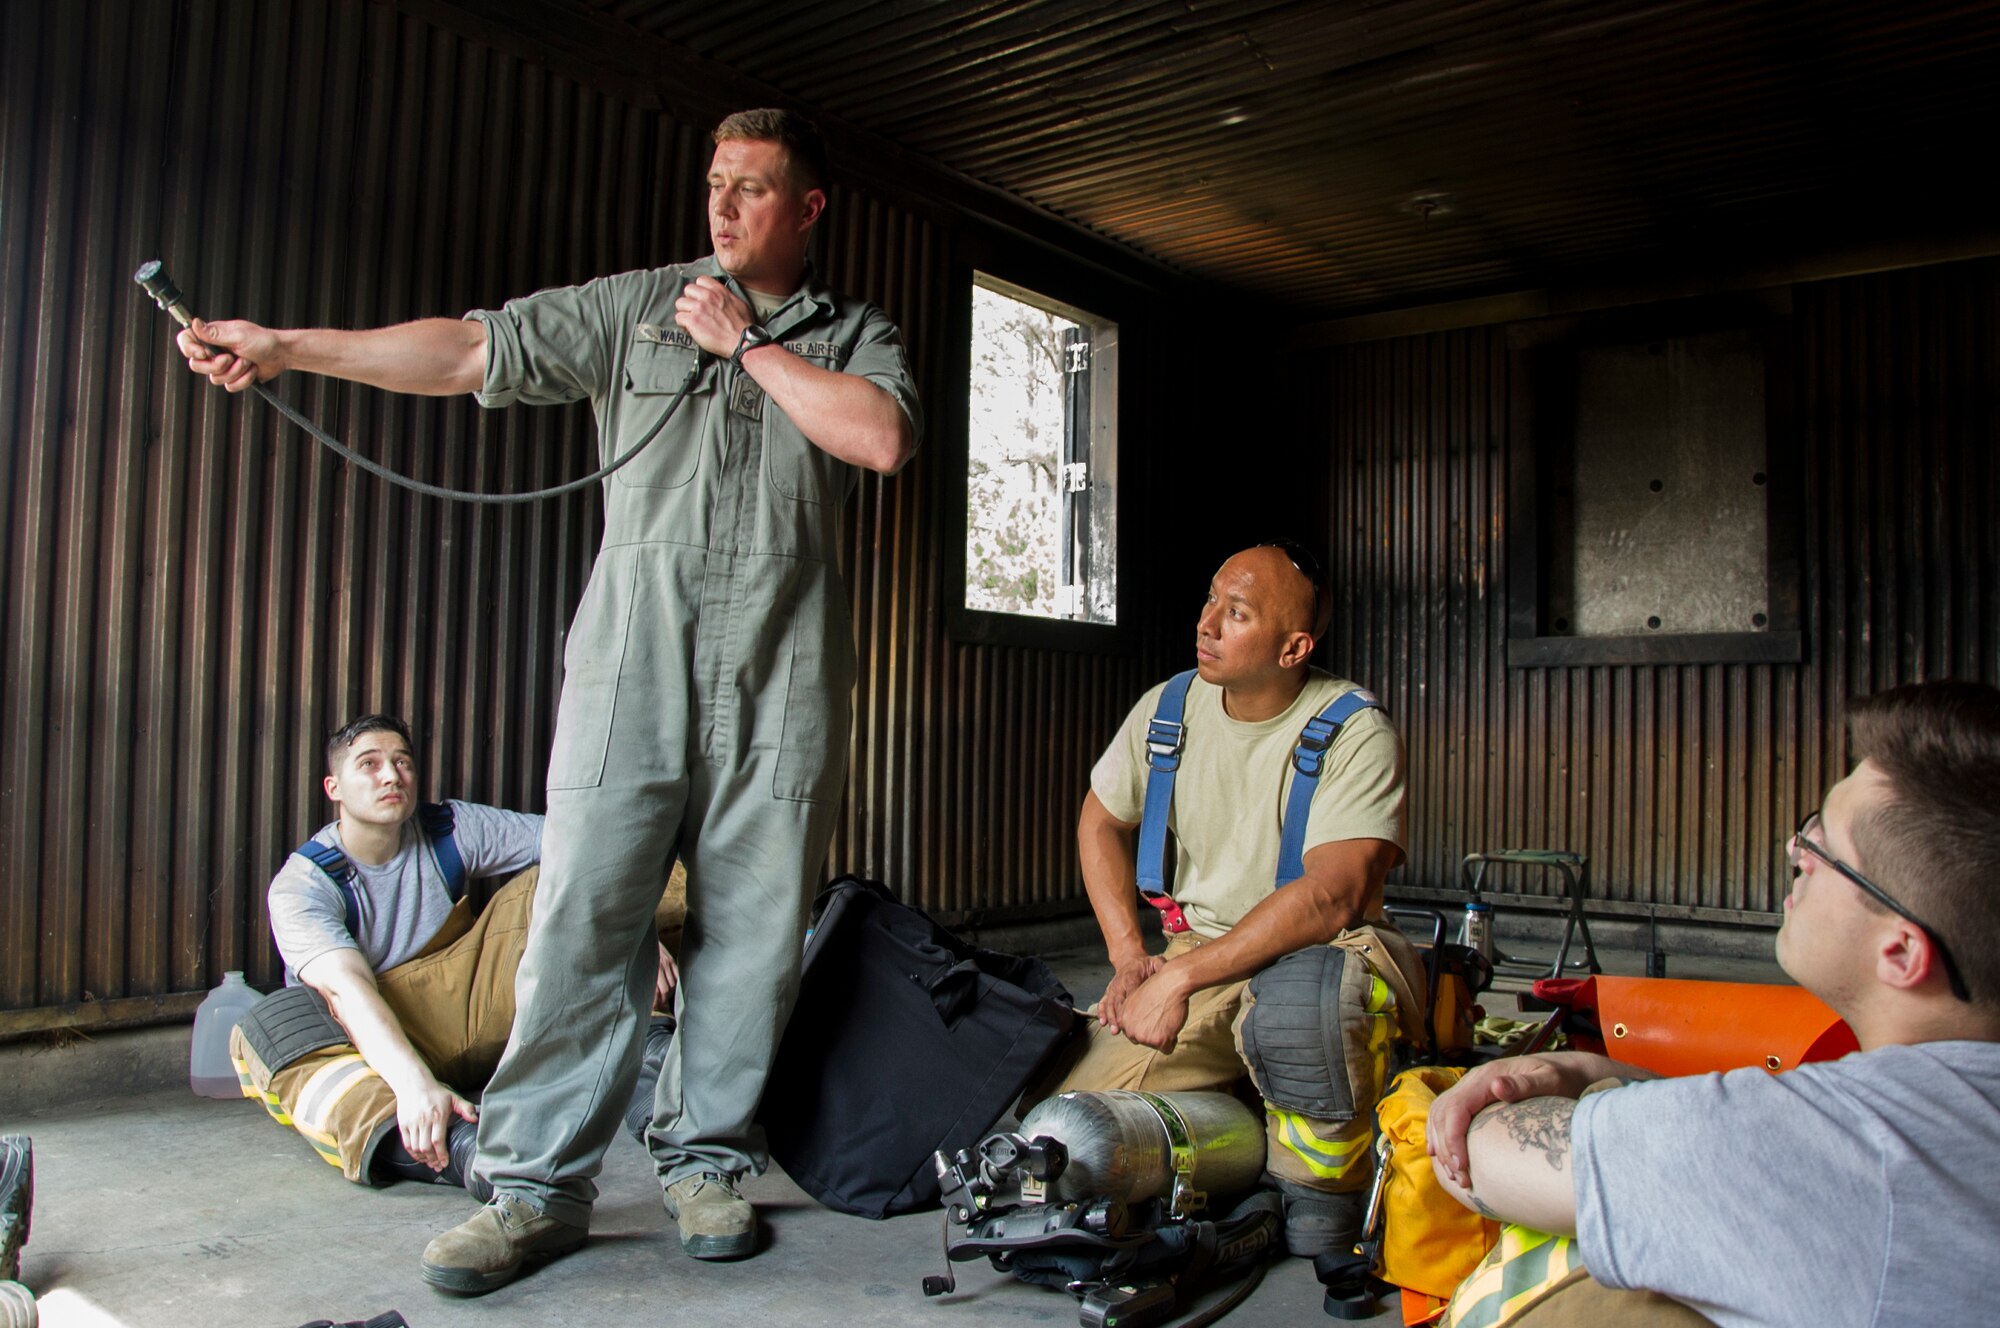 U.S. Air Force Master Sgt. Nick Ward, of Chicago, Illinois, a member of the 434th Civil Engineer Squadron, Grissom Air Reserve Base, explains how to hook up a hose from an empty air cylinder to a full cylinder during the first-ever Air Force Reserve Command Firefighter Rescue and Survival Course at Dobbins Air Reserve Base, Ga., April 18, 2017. Twenty Citizen Airmen participated in the intense 50-hour course held at the 622nd Civil Engineer Group expeditionary combat support-training certification center, which focused on a Rapid Intervention Crew, or RIC. The RIC is a dedicated and specially trained group of firefighters whose responsibilities include safely evacuating a distressed firefighter from a structure. (U.S. Air Force photo by Master Sgt. Theanne K. Herrmann)